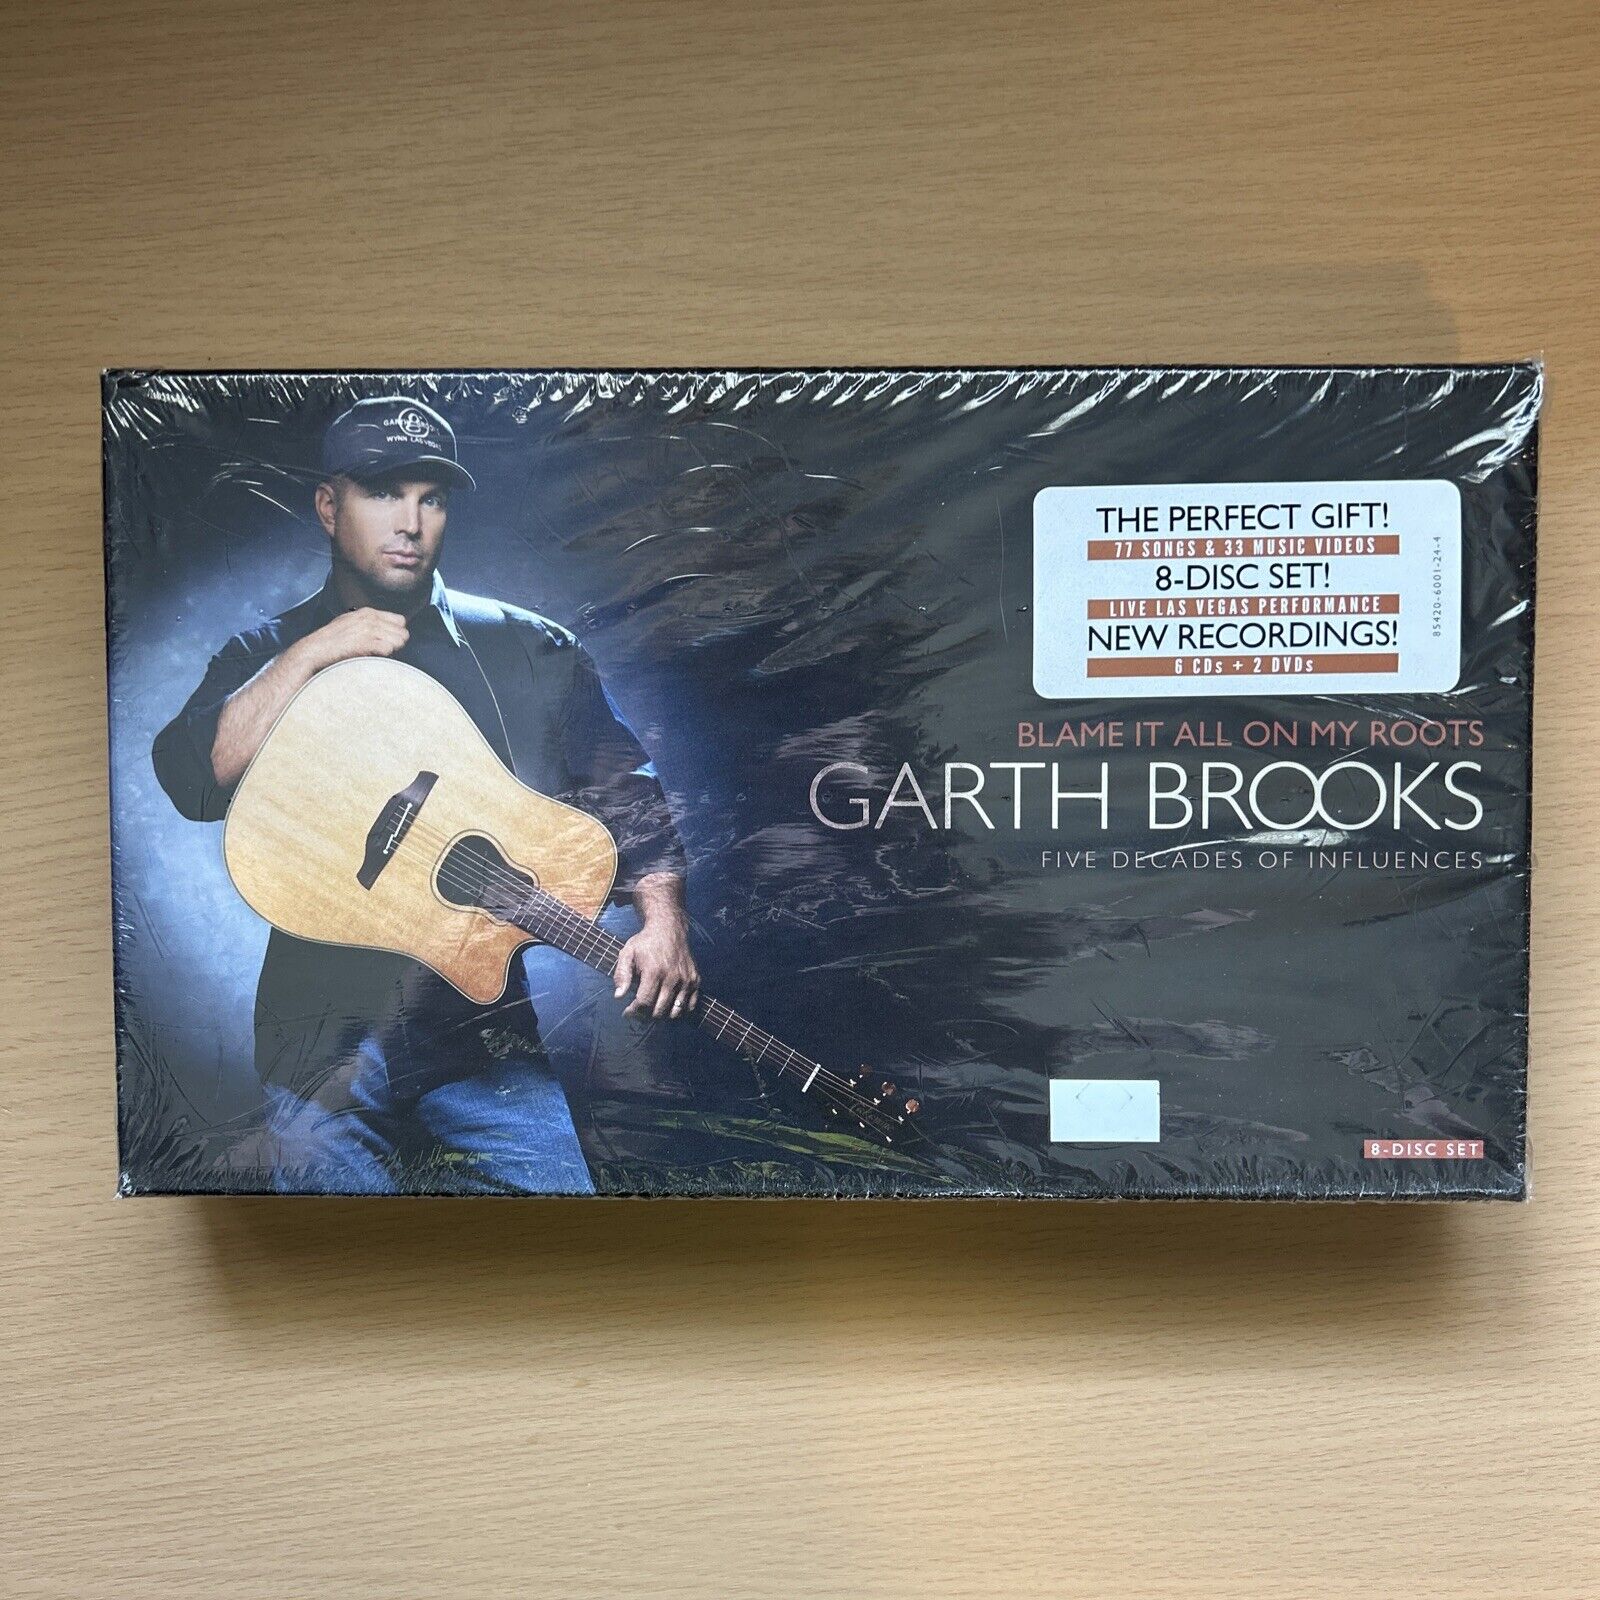 Garth Brooks Blame it All on My Roots 6 CD & 2 DVD Box Set New Sealed Unopened